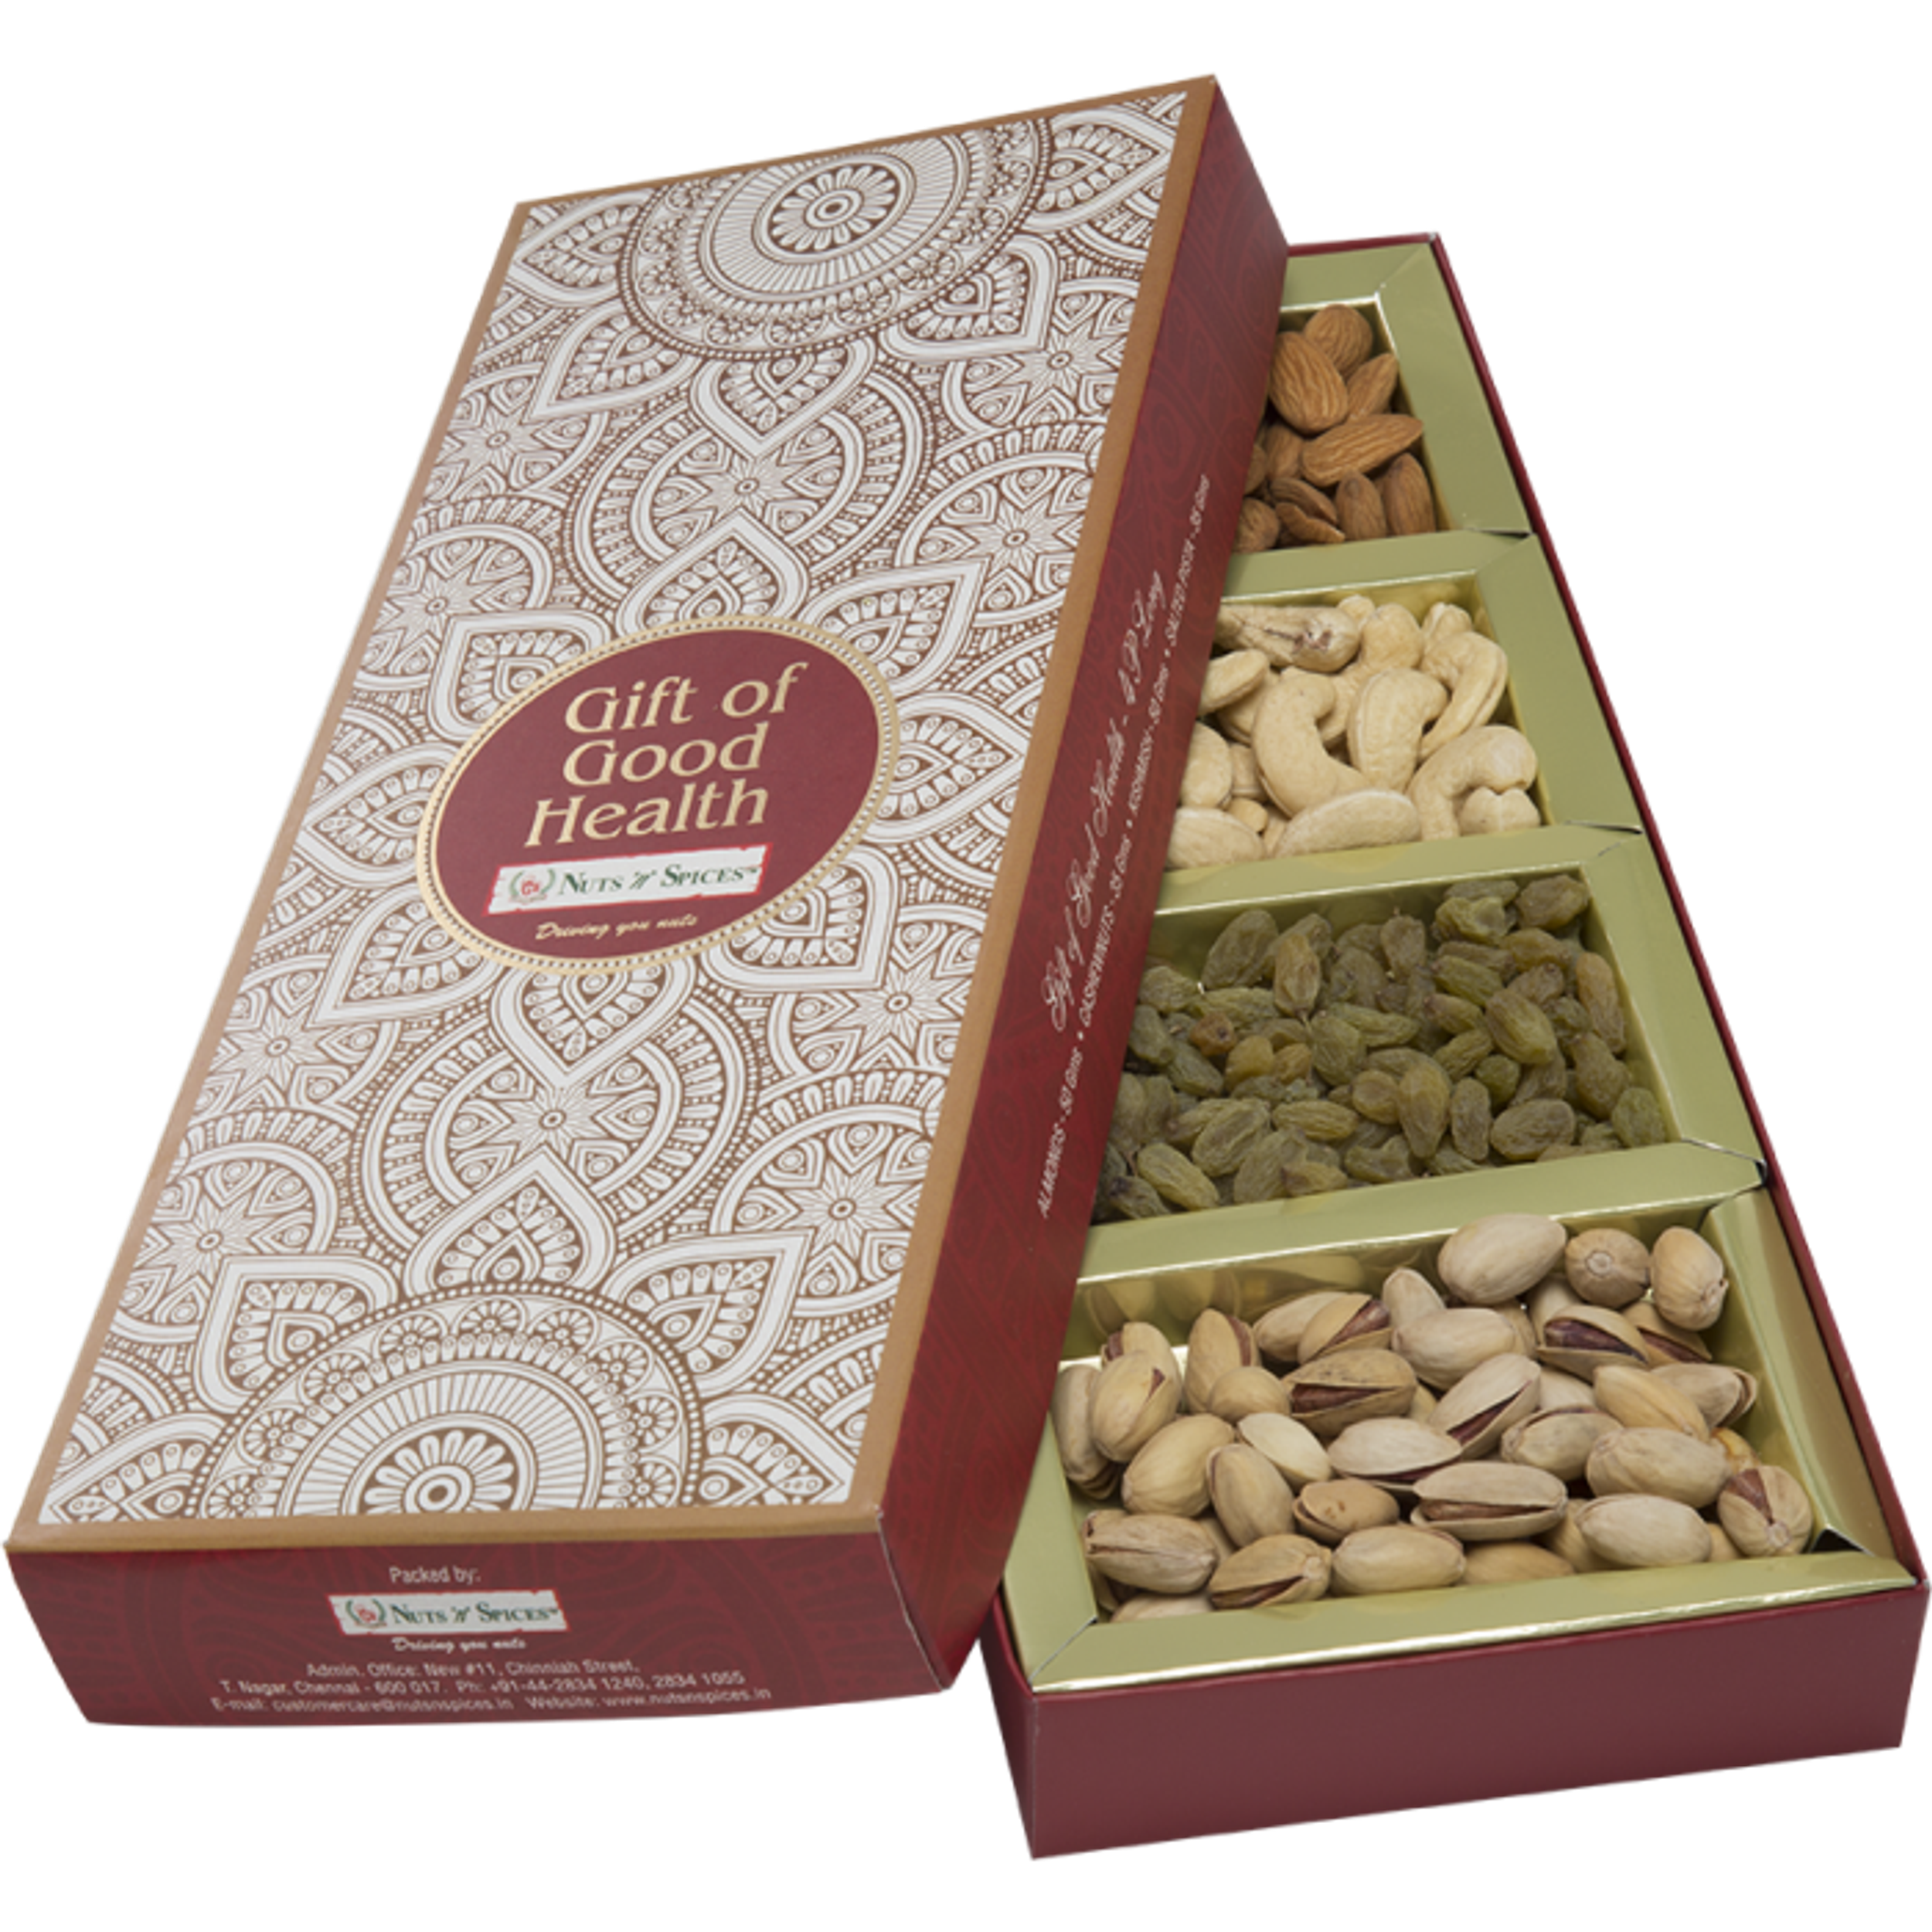 Cape Spices Dry Fruits Hamper containing Cashews Almonds Figs Raisins  Walnuts and Pistachios